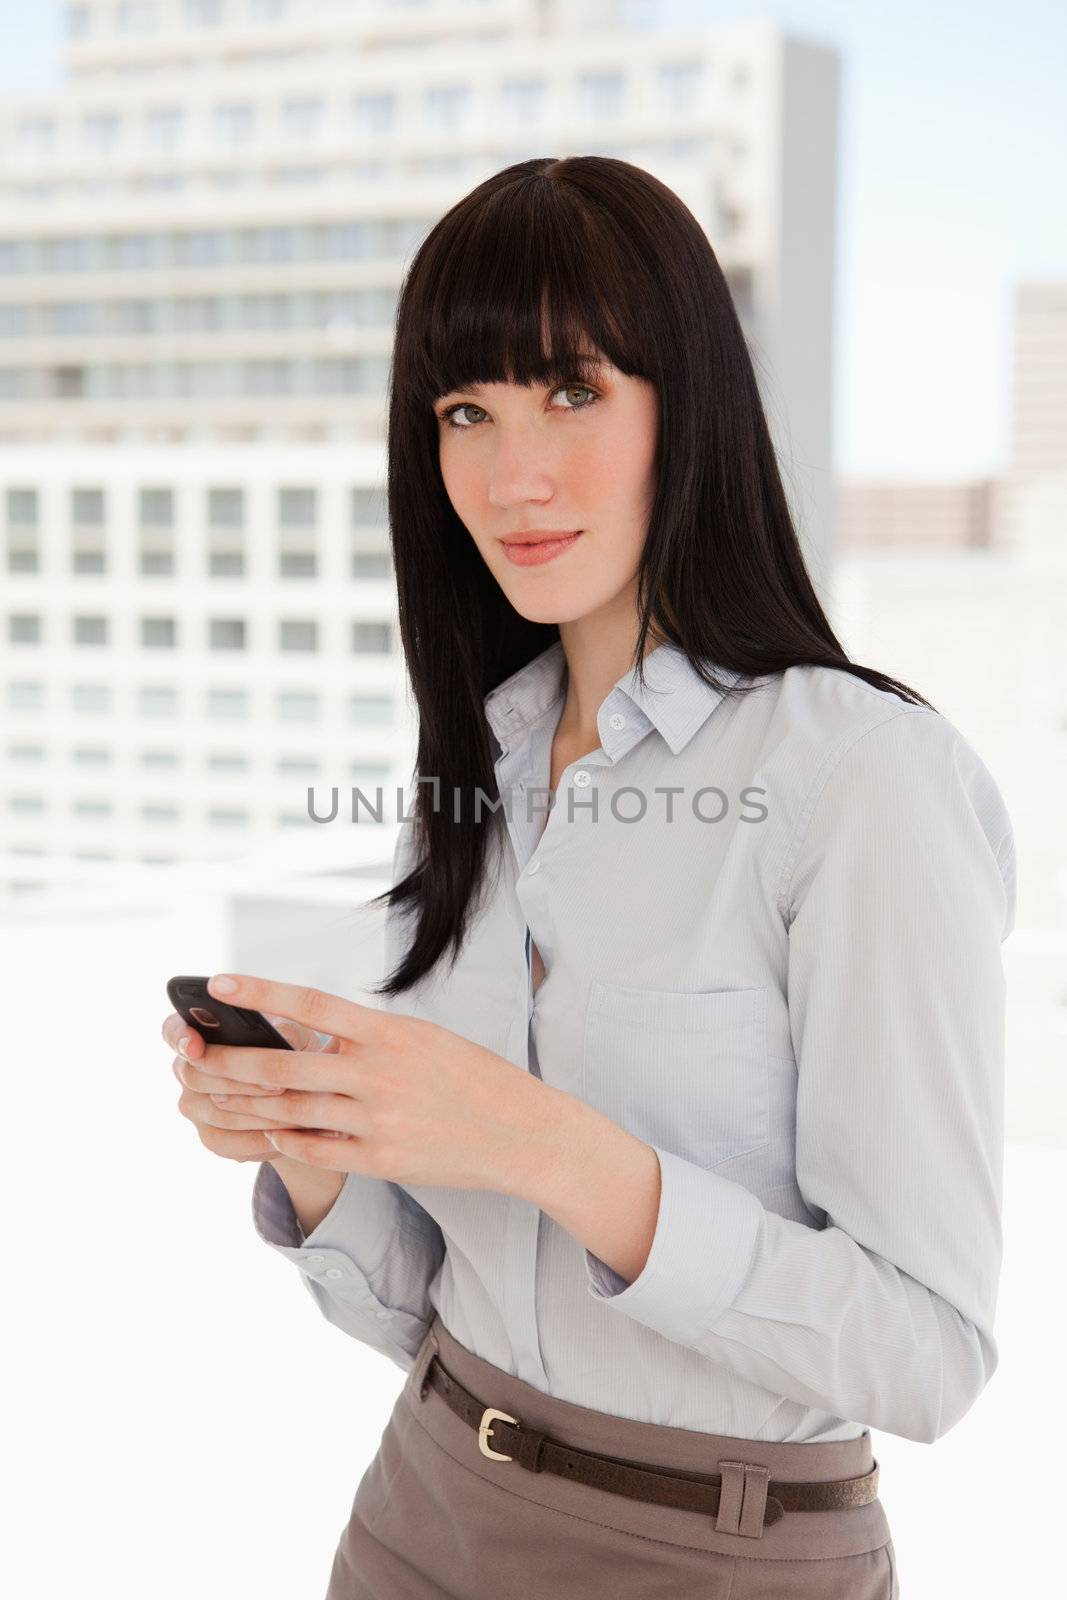 A business woman looks in front of her as she sends a text from her mobile phone